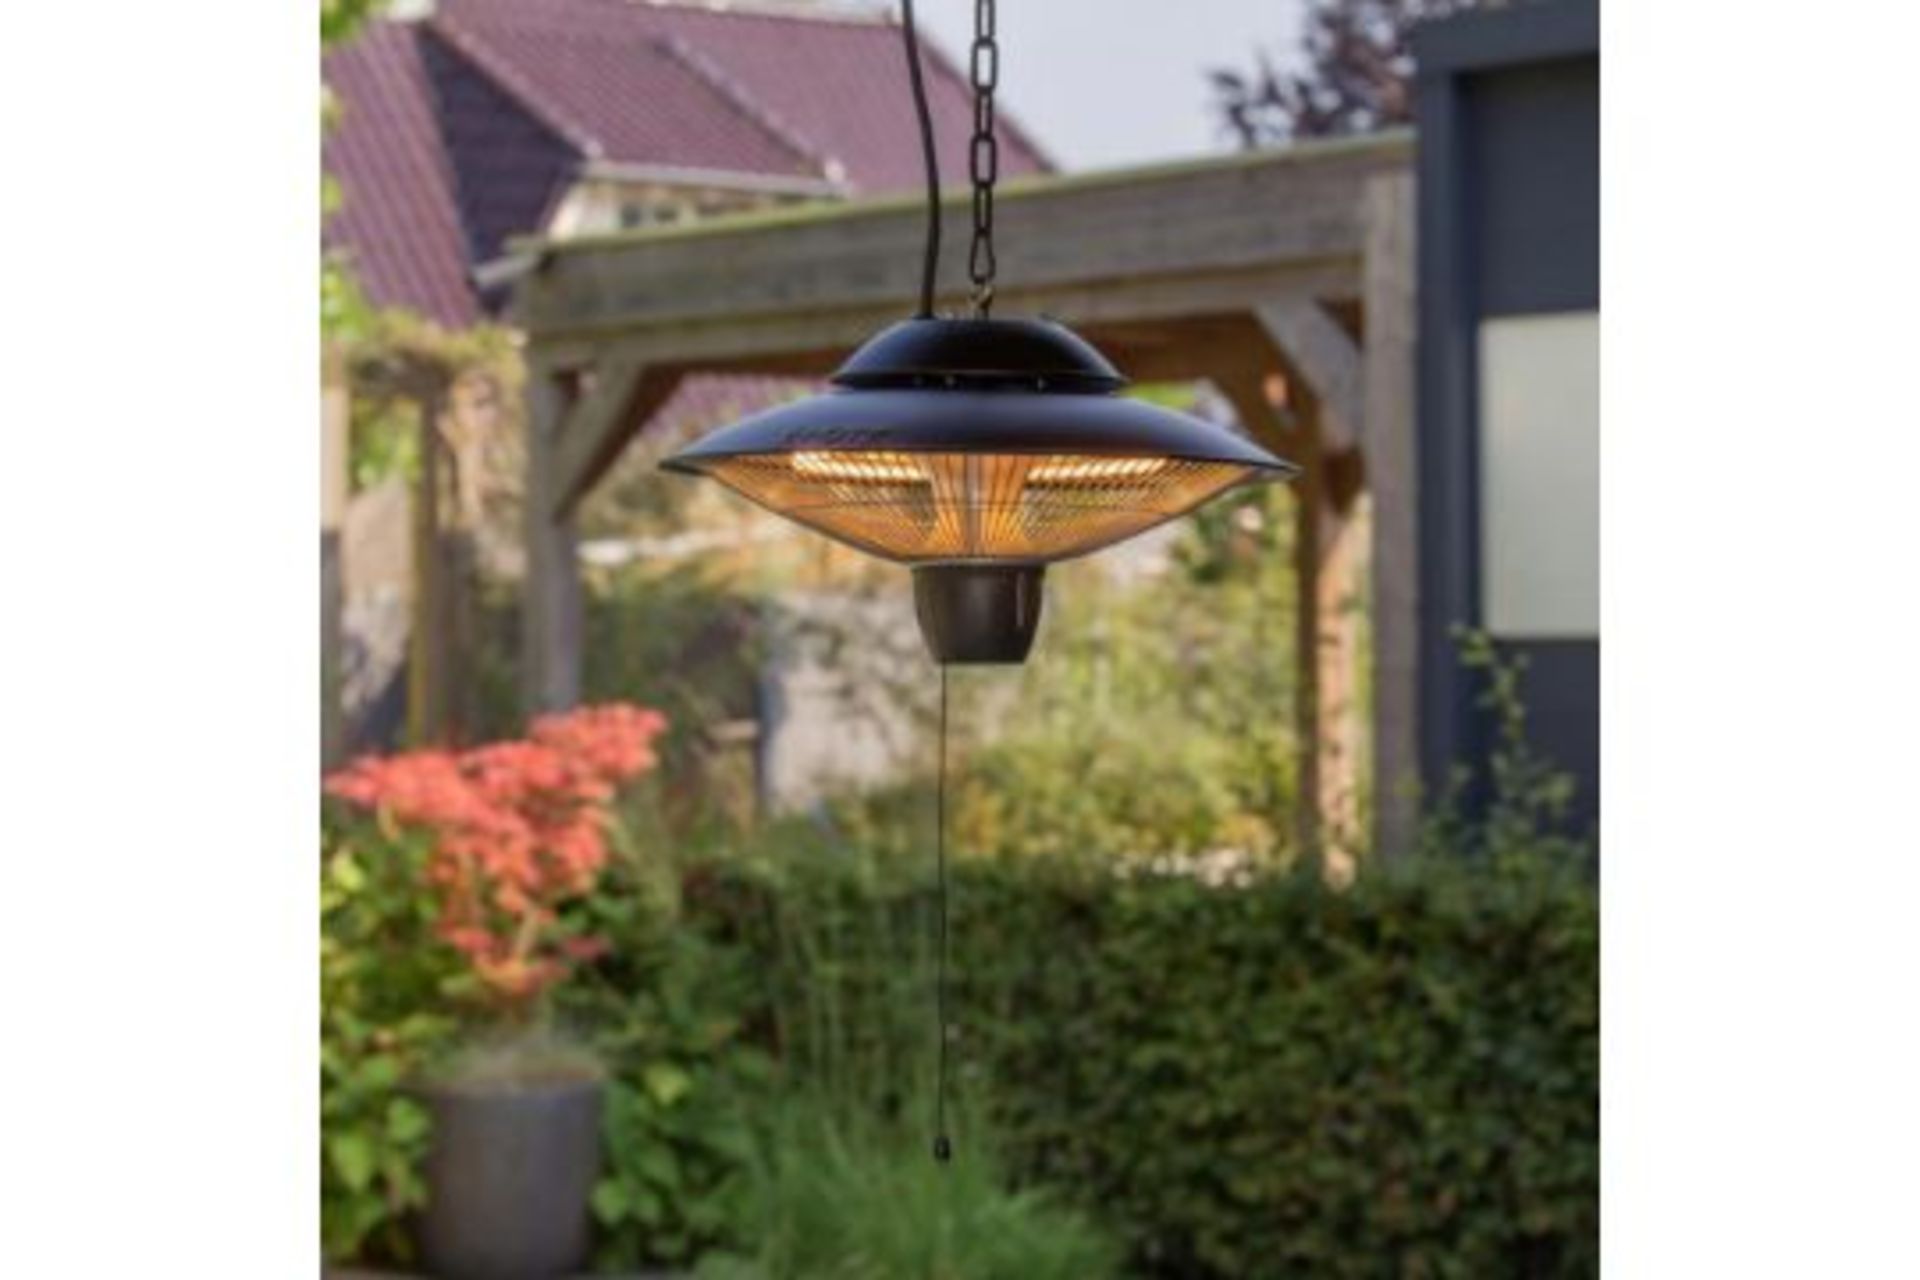 Brand New The Sunred Heater Barcelona Hanging 1500W RRP £299.A high quality and efficient outdoor - Image 2 of 2